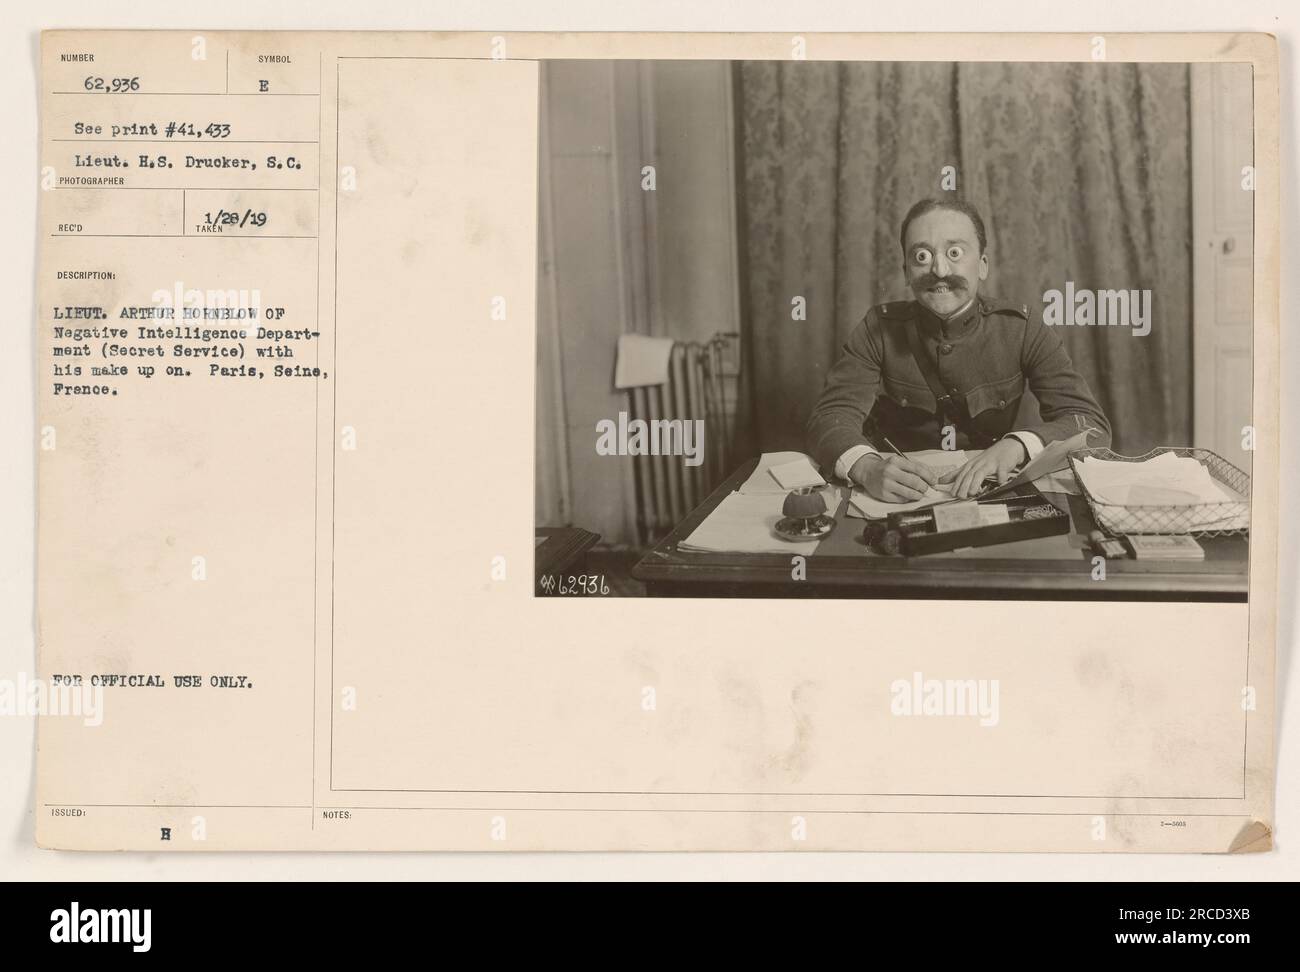 Lieutenant Arthur Hornblow of the Negative Intelligence Department (Secret Service) is pictured wearing make-up in this photograph taken in Paris, France during World War One. This image is recorded under the symbol E and print number 41,433. This photograph was taken by Lieutenant H.S. Drucker, S.C., and the description was issued on January 29, 1919. This image is labeled for official use only. Stock Photo